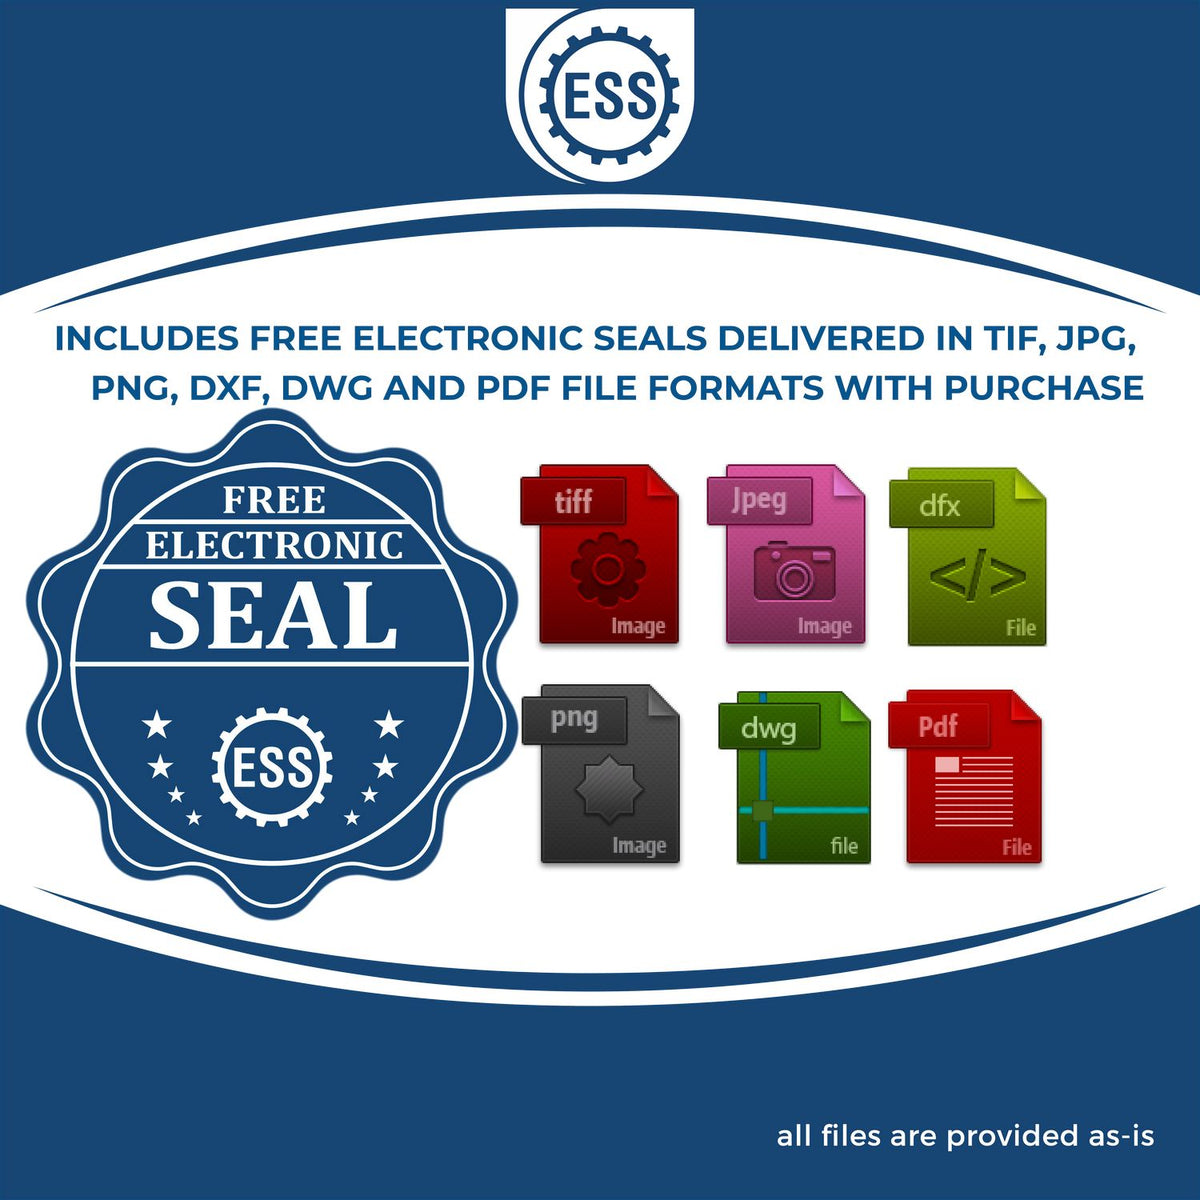 An infographic for the free electronic seal for the Long Reach Maine Land Surveyor Seal illustrating the different file type icons such as DXF, DWG, TIF, JPG and PNG.